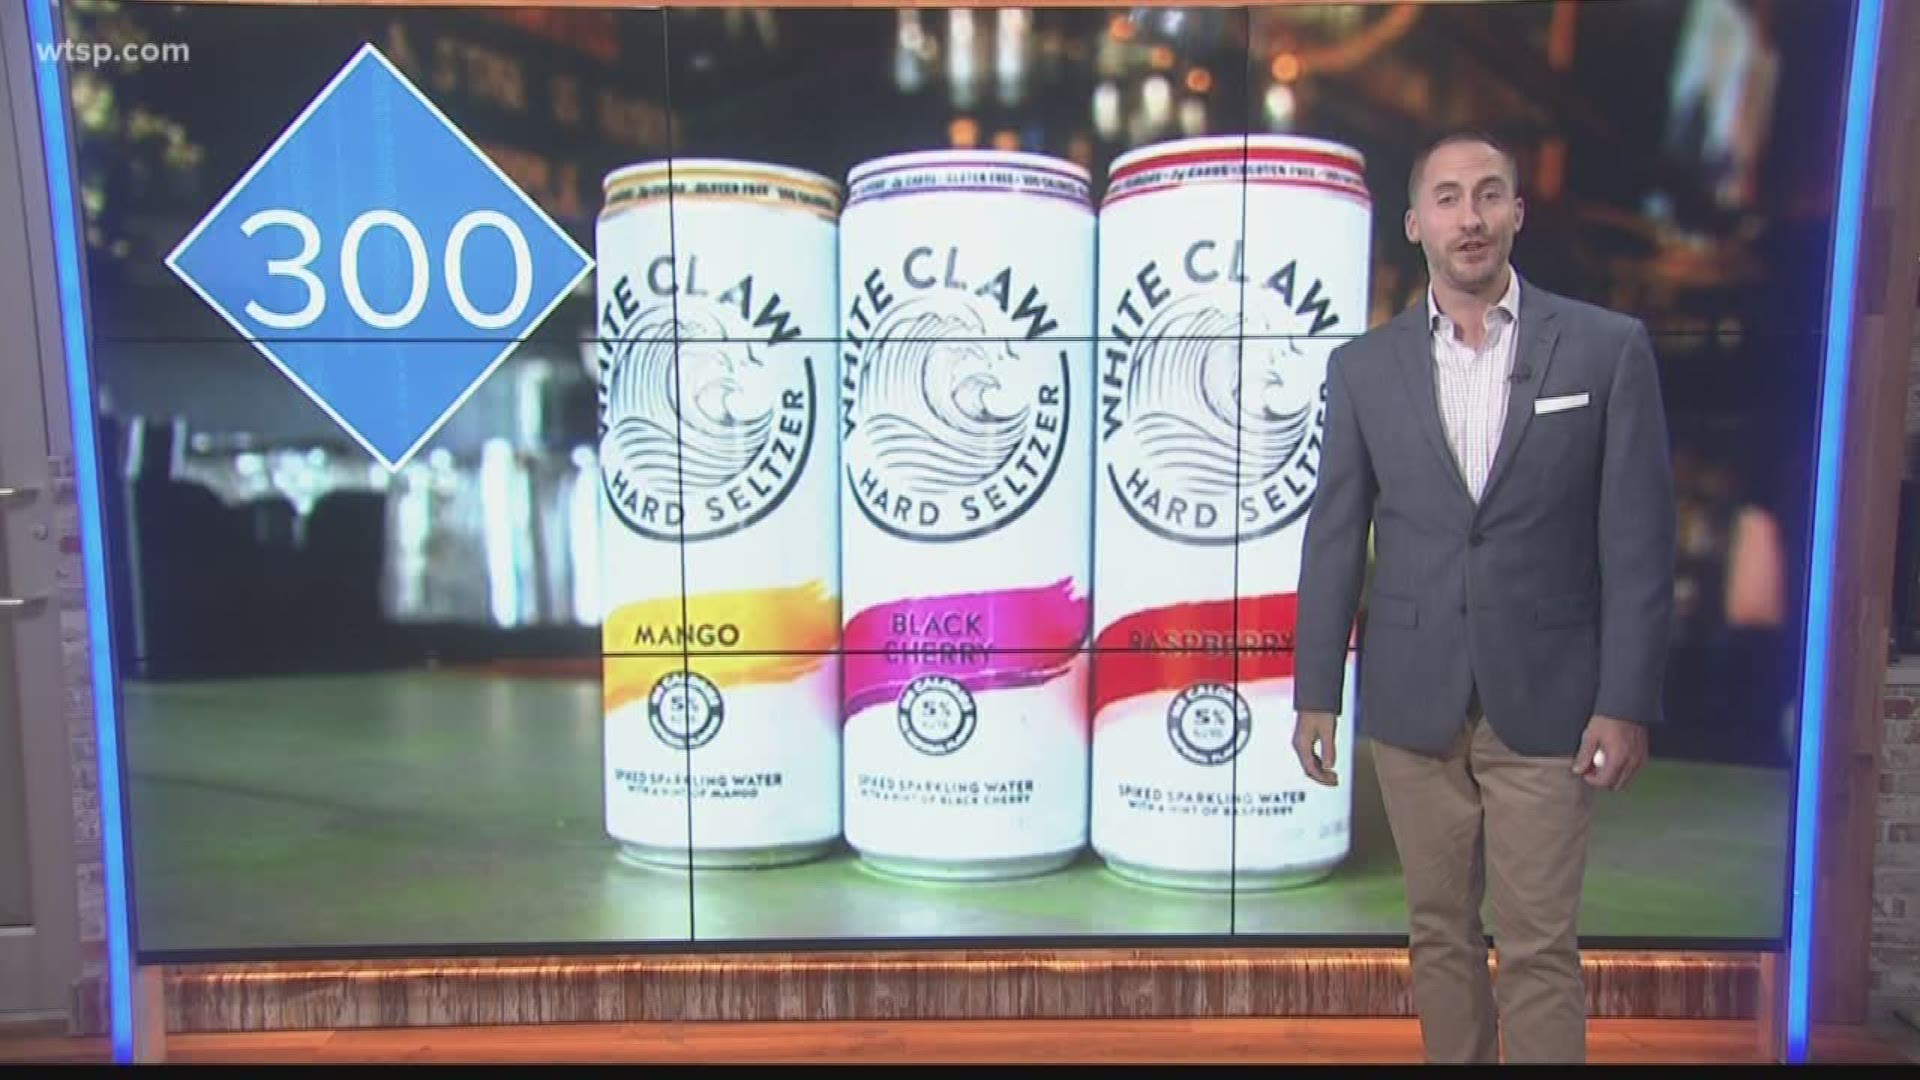 There’s a problem bubbling for one of America’s biggest hard seltzer brands.

“White Claw” seltzer announced there was a shortage of the popular, refreshing, low-calorie drink Friday, CNN Business reported.

CNN reports that the company was working to get stock back up to normal but didn’t have a time frame for when that would be.